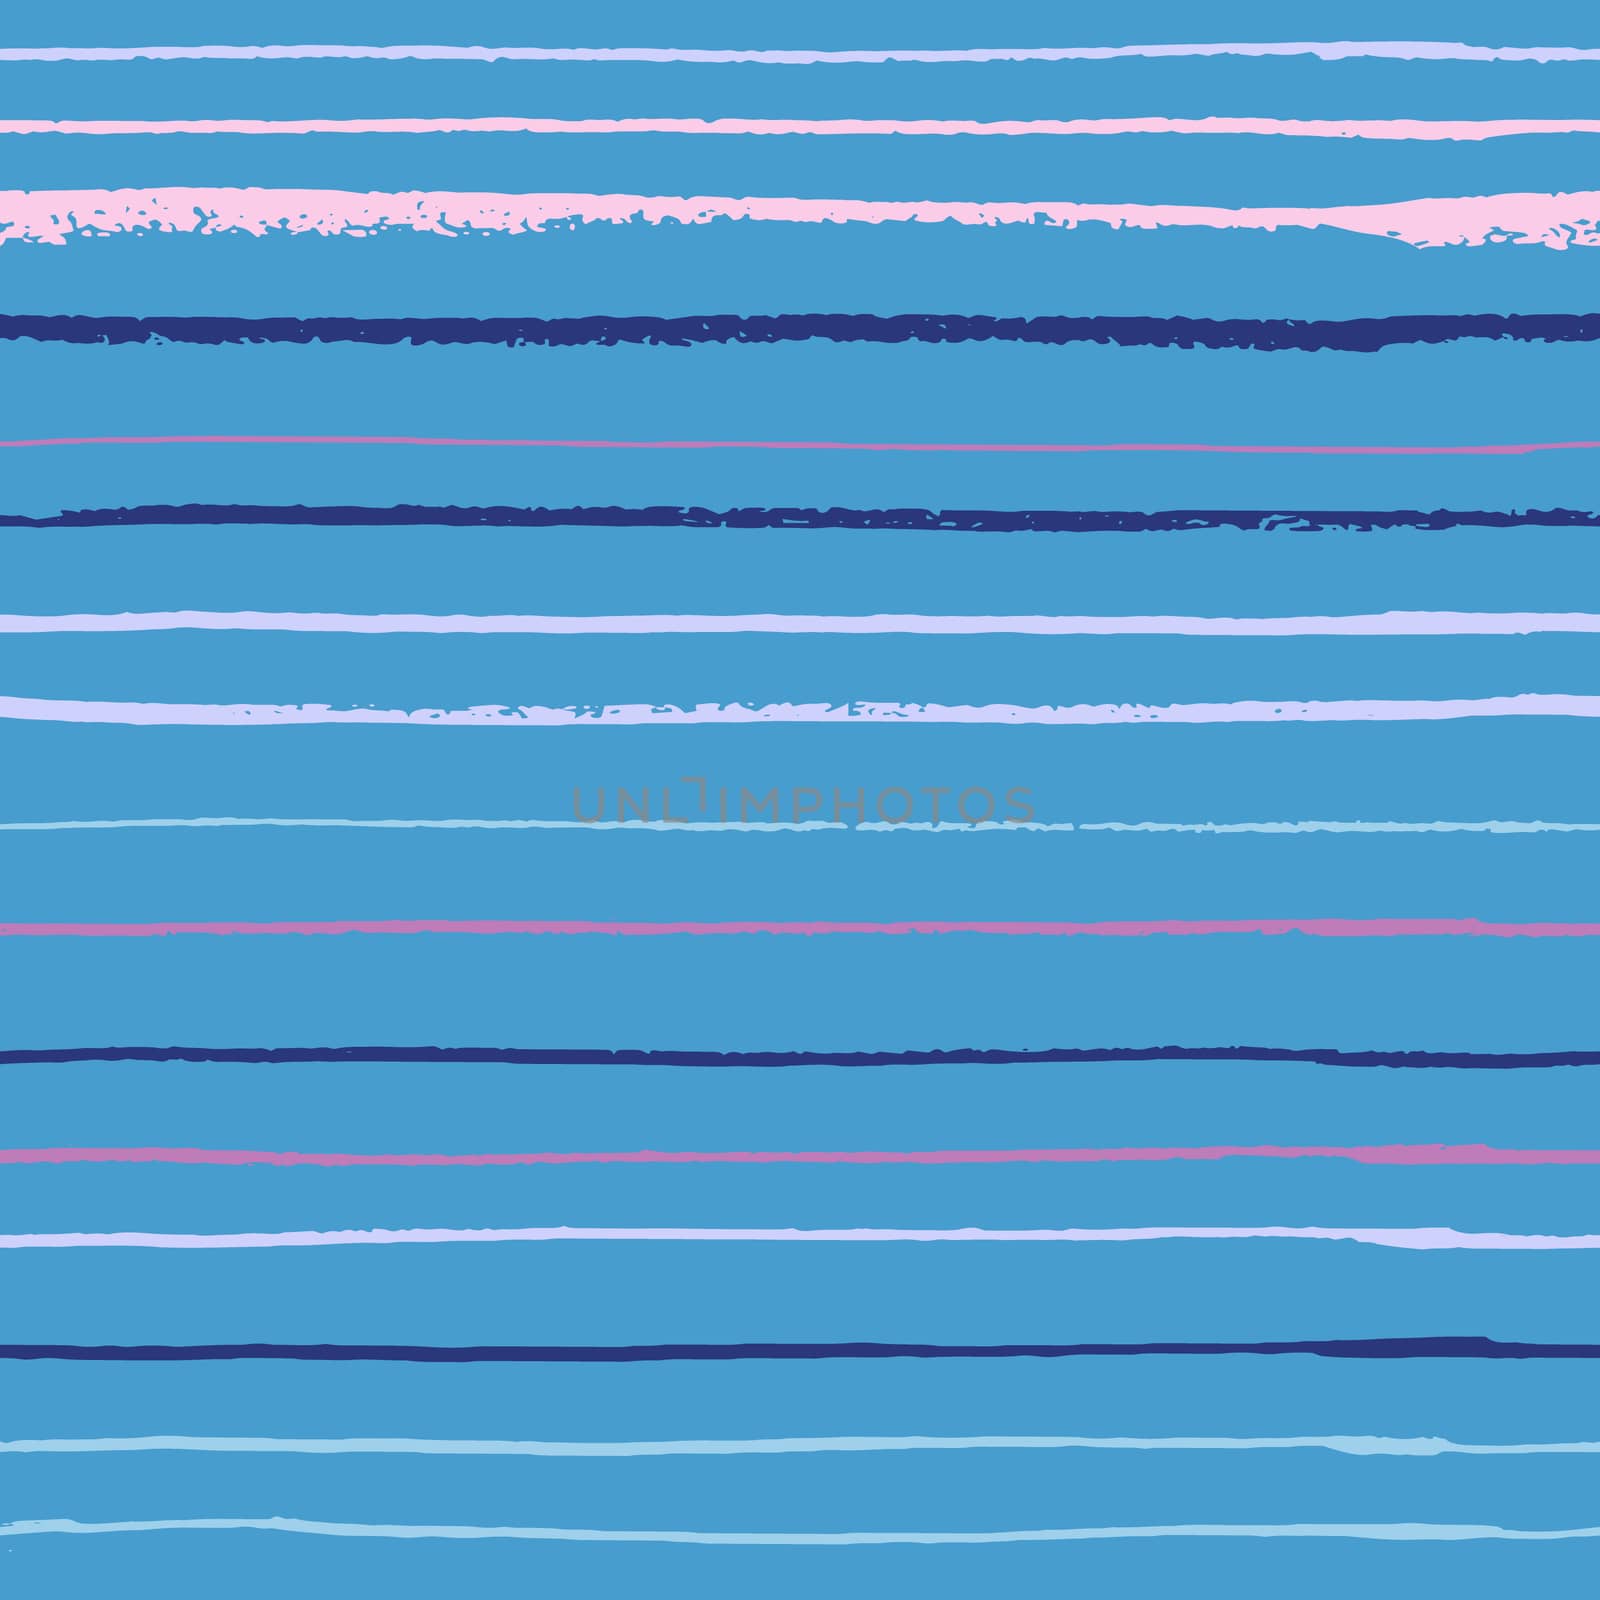 Pastel color horizontal textured lines on blue trendy seamless pattern background. Design for wrapping paper, wallpaper, fabric print, backdrop. Vector illustration.